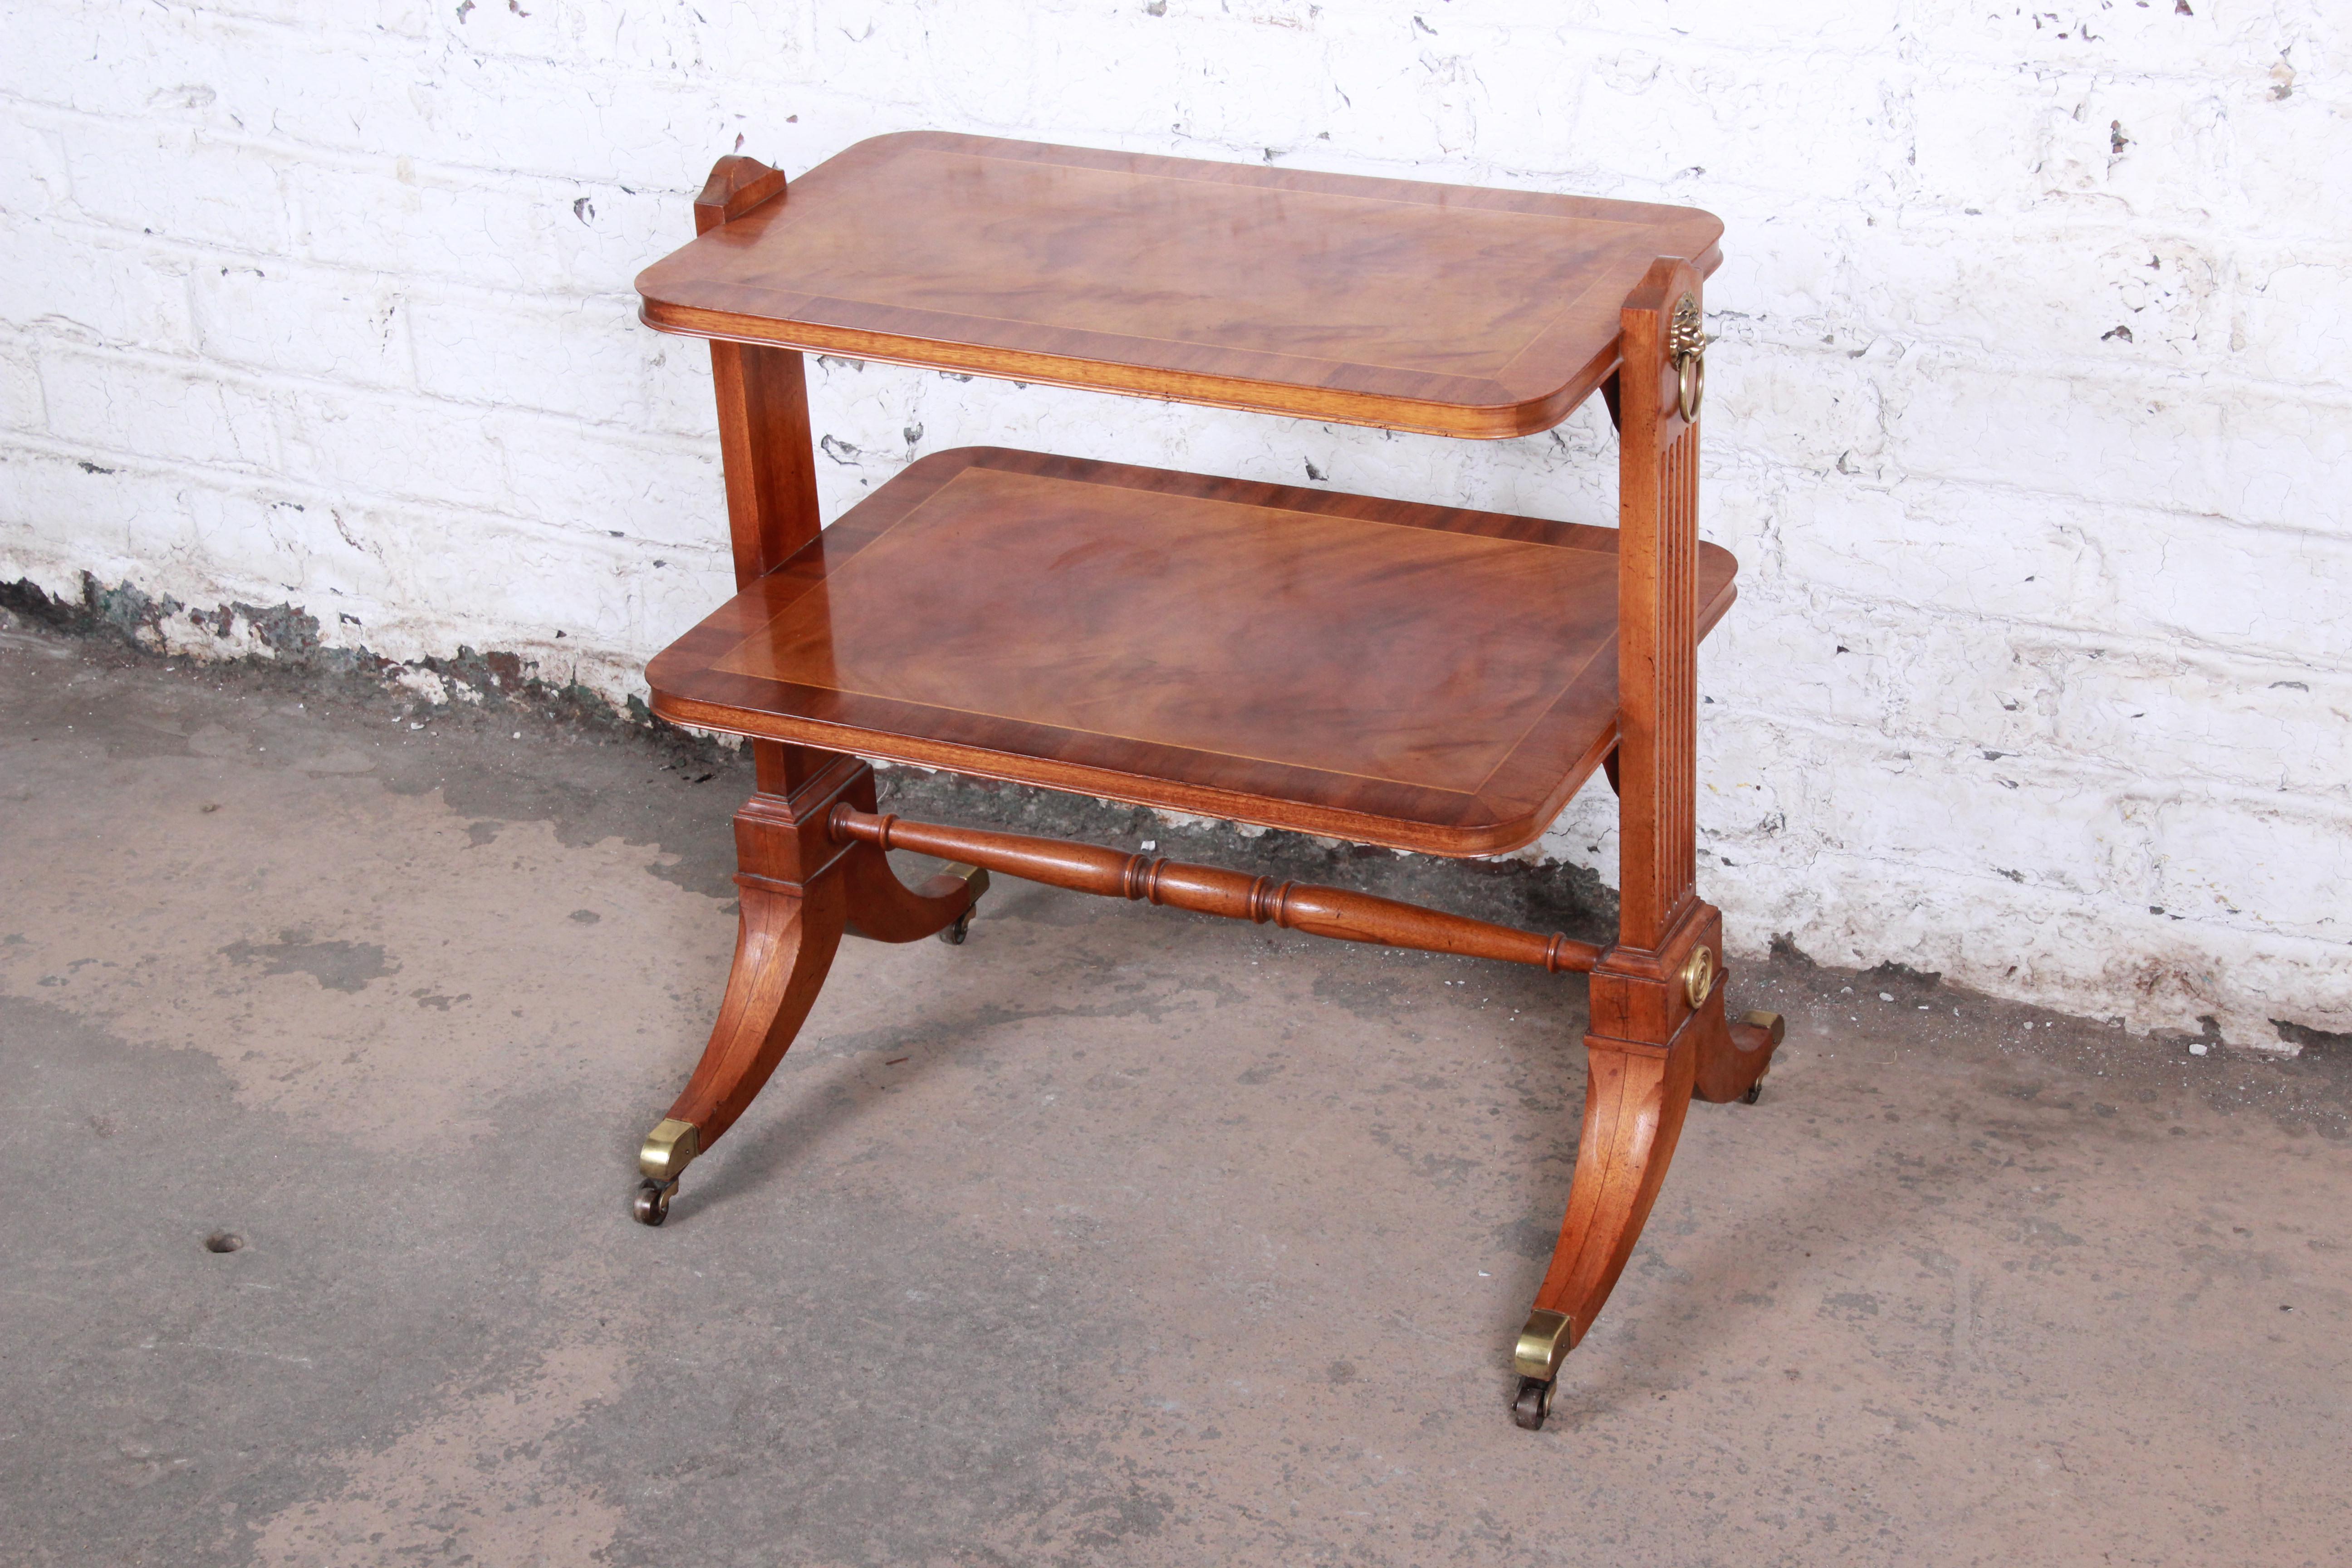 An exceptional Georgian banded mahogany two-tier occasional table by Baker Furniture. The table features gorgeous flame mahogany wood grain with nice carved details and brass accents, including brass-tipped feet and casters. The original baker label